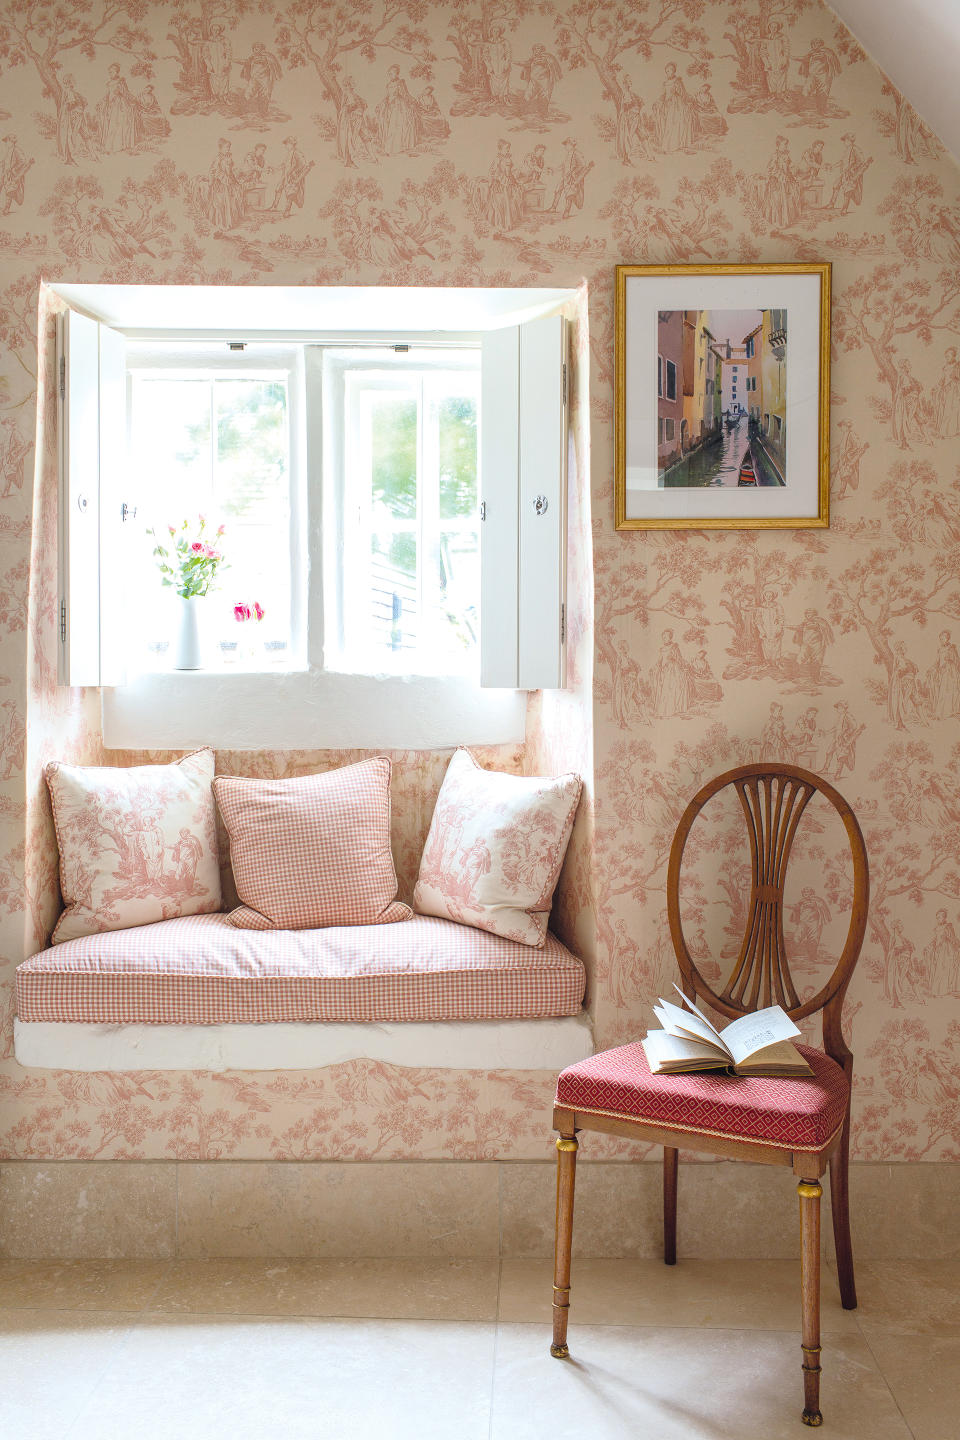 8. Make a feature of a cottage window with a window seat